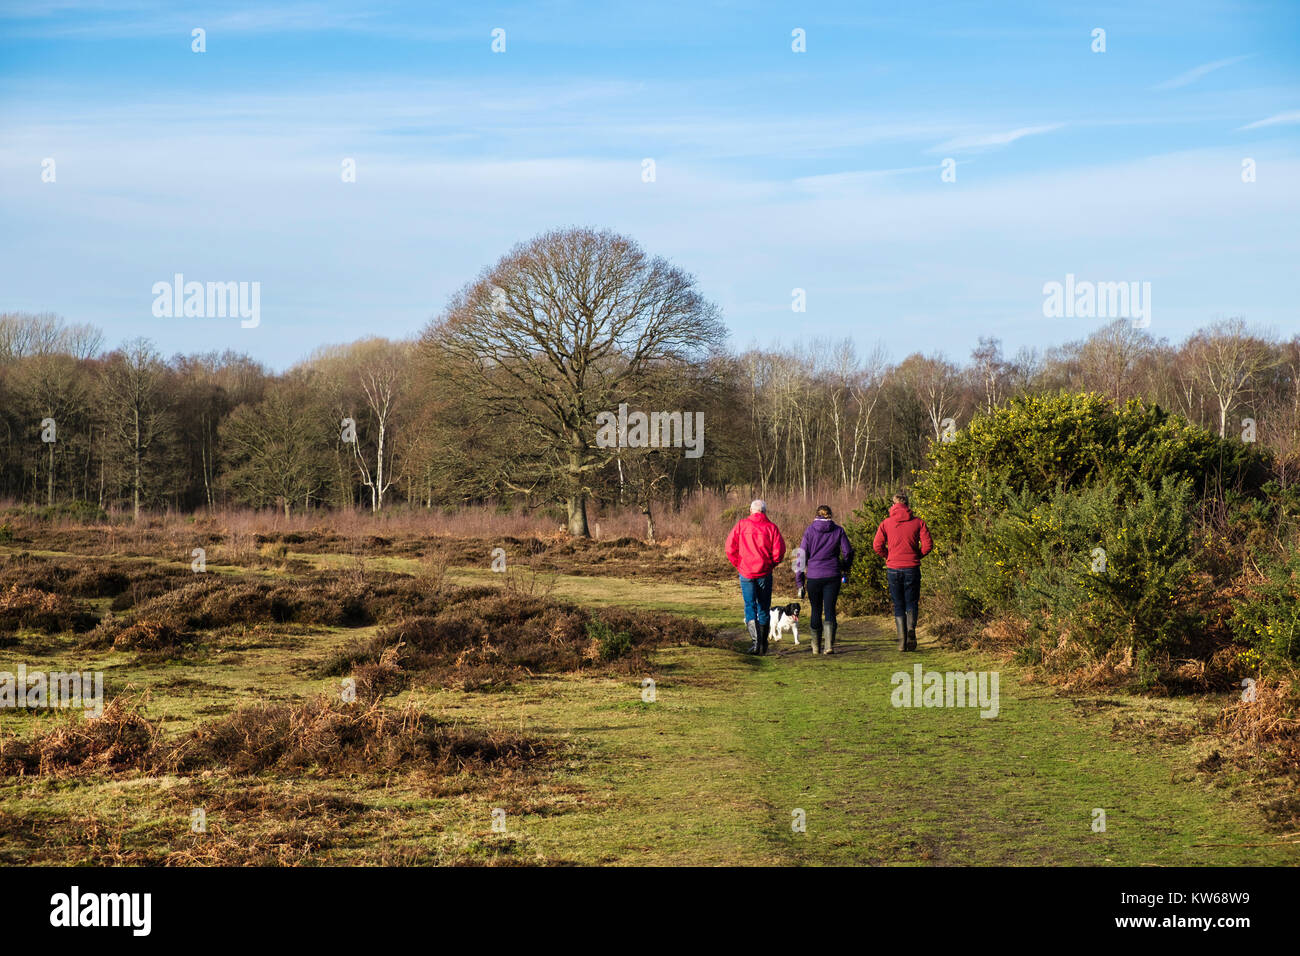 People on a country walk walking with a dog on heathland in Kent Wildlife Trust nature reserve. Hothfield Heathlands Ashford Kent England UK Britain Stock Photo